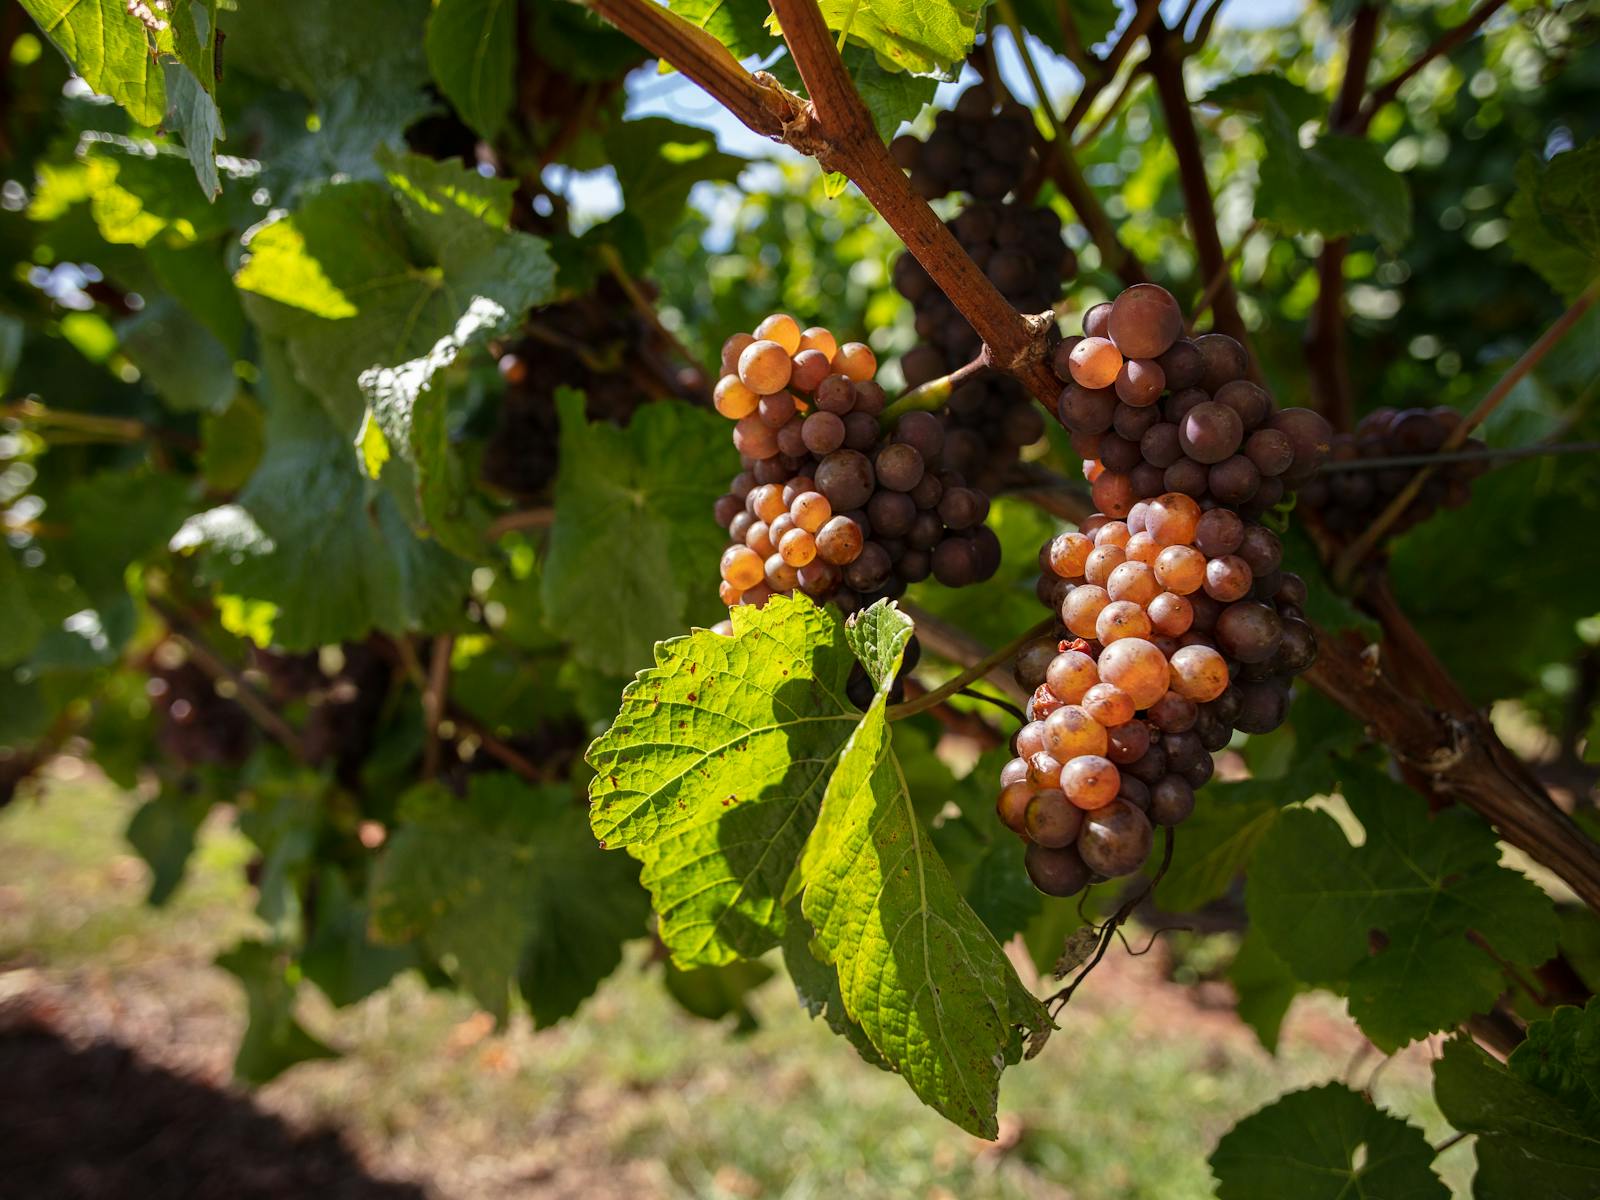 The grapes as they grow on the vine, on this tour we will get to see this firsthand.